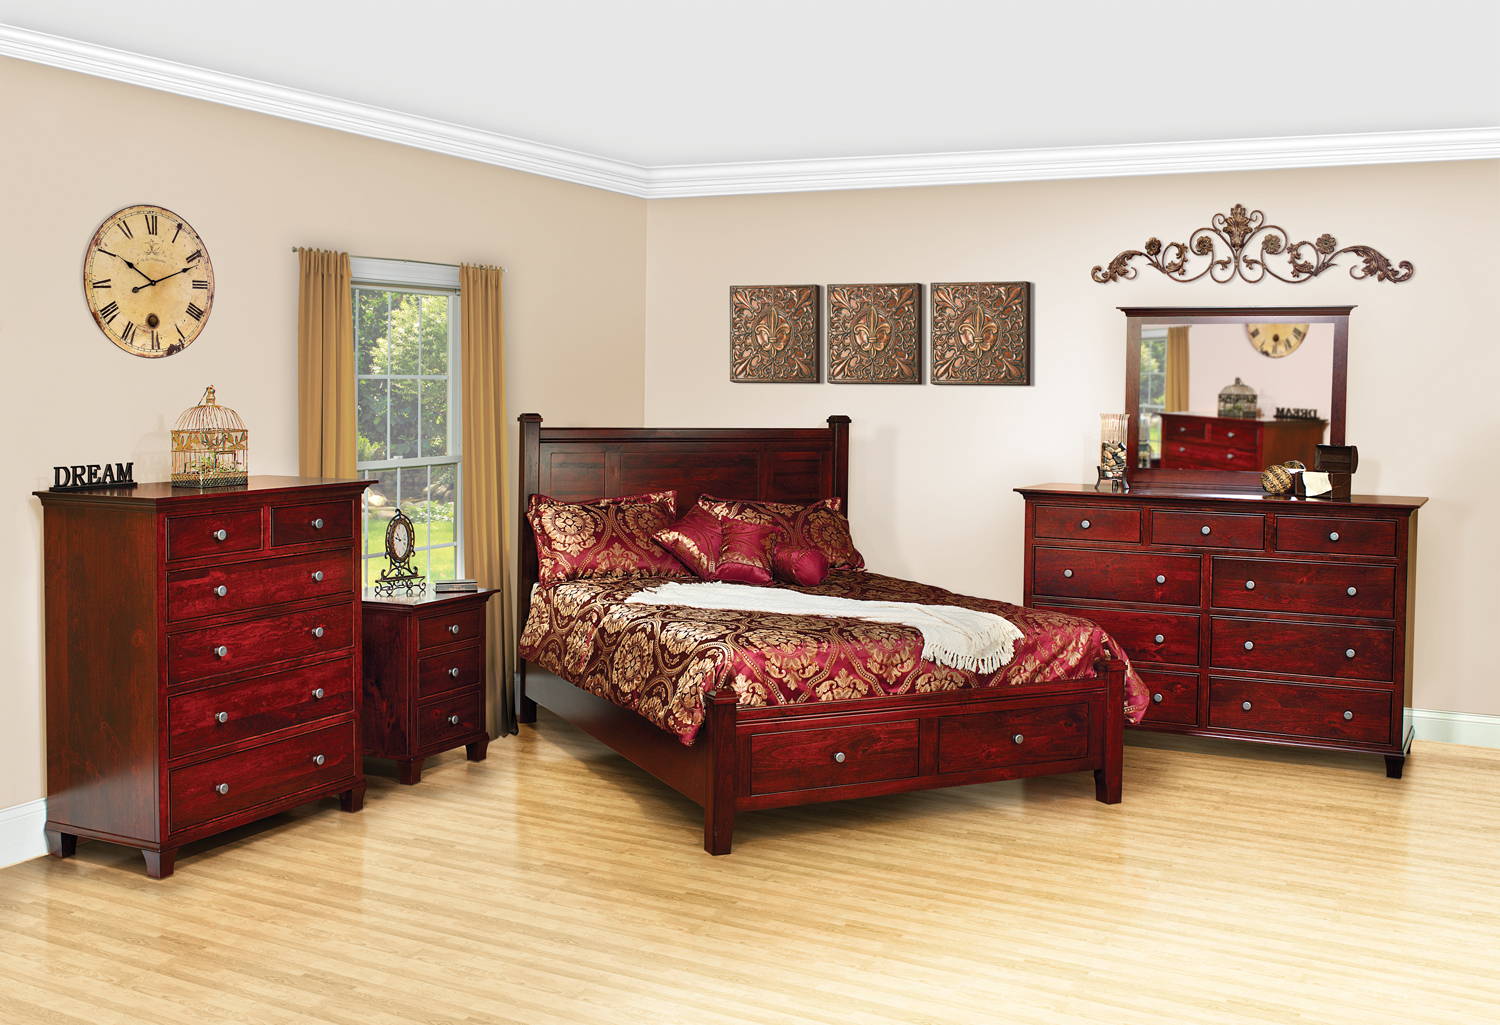 Image of fully customizable Riverside Bedroom Set through Harvest Home Interiors Amish Solid Wood Furniture